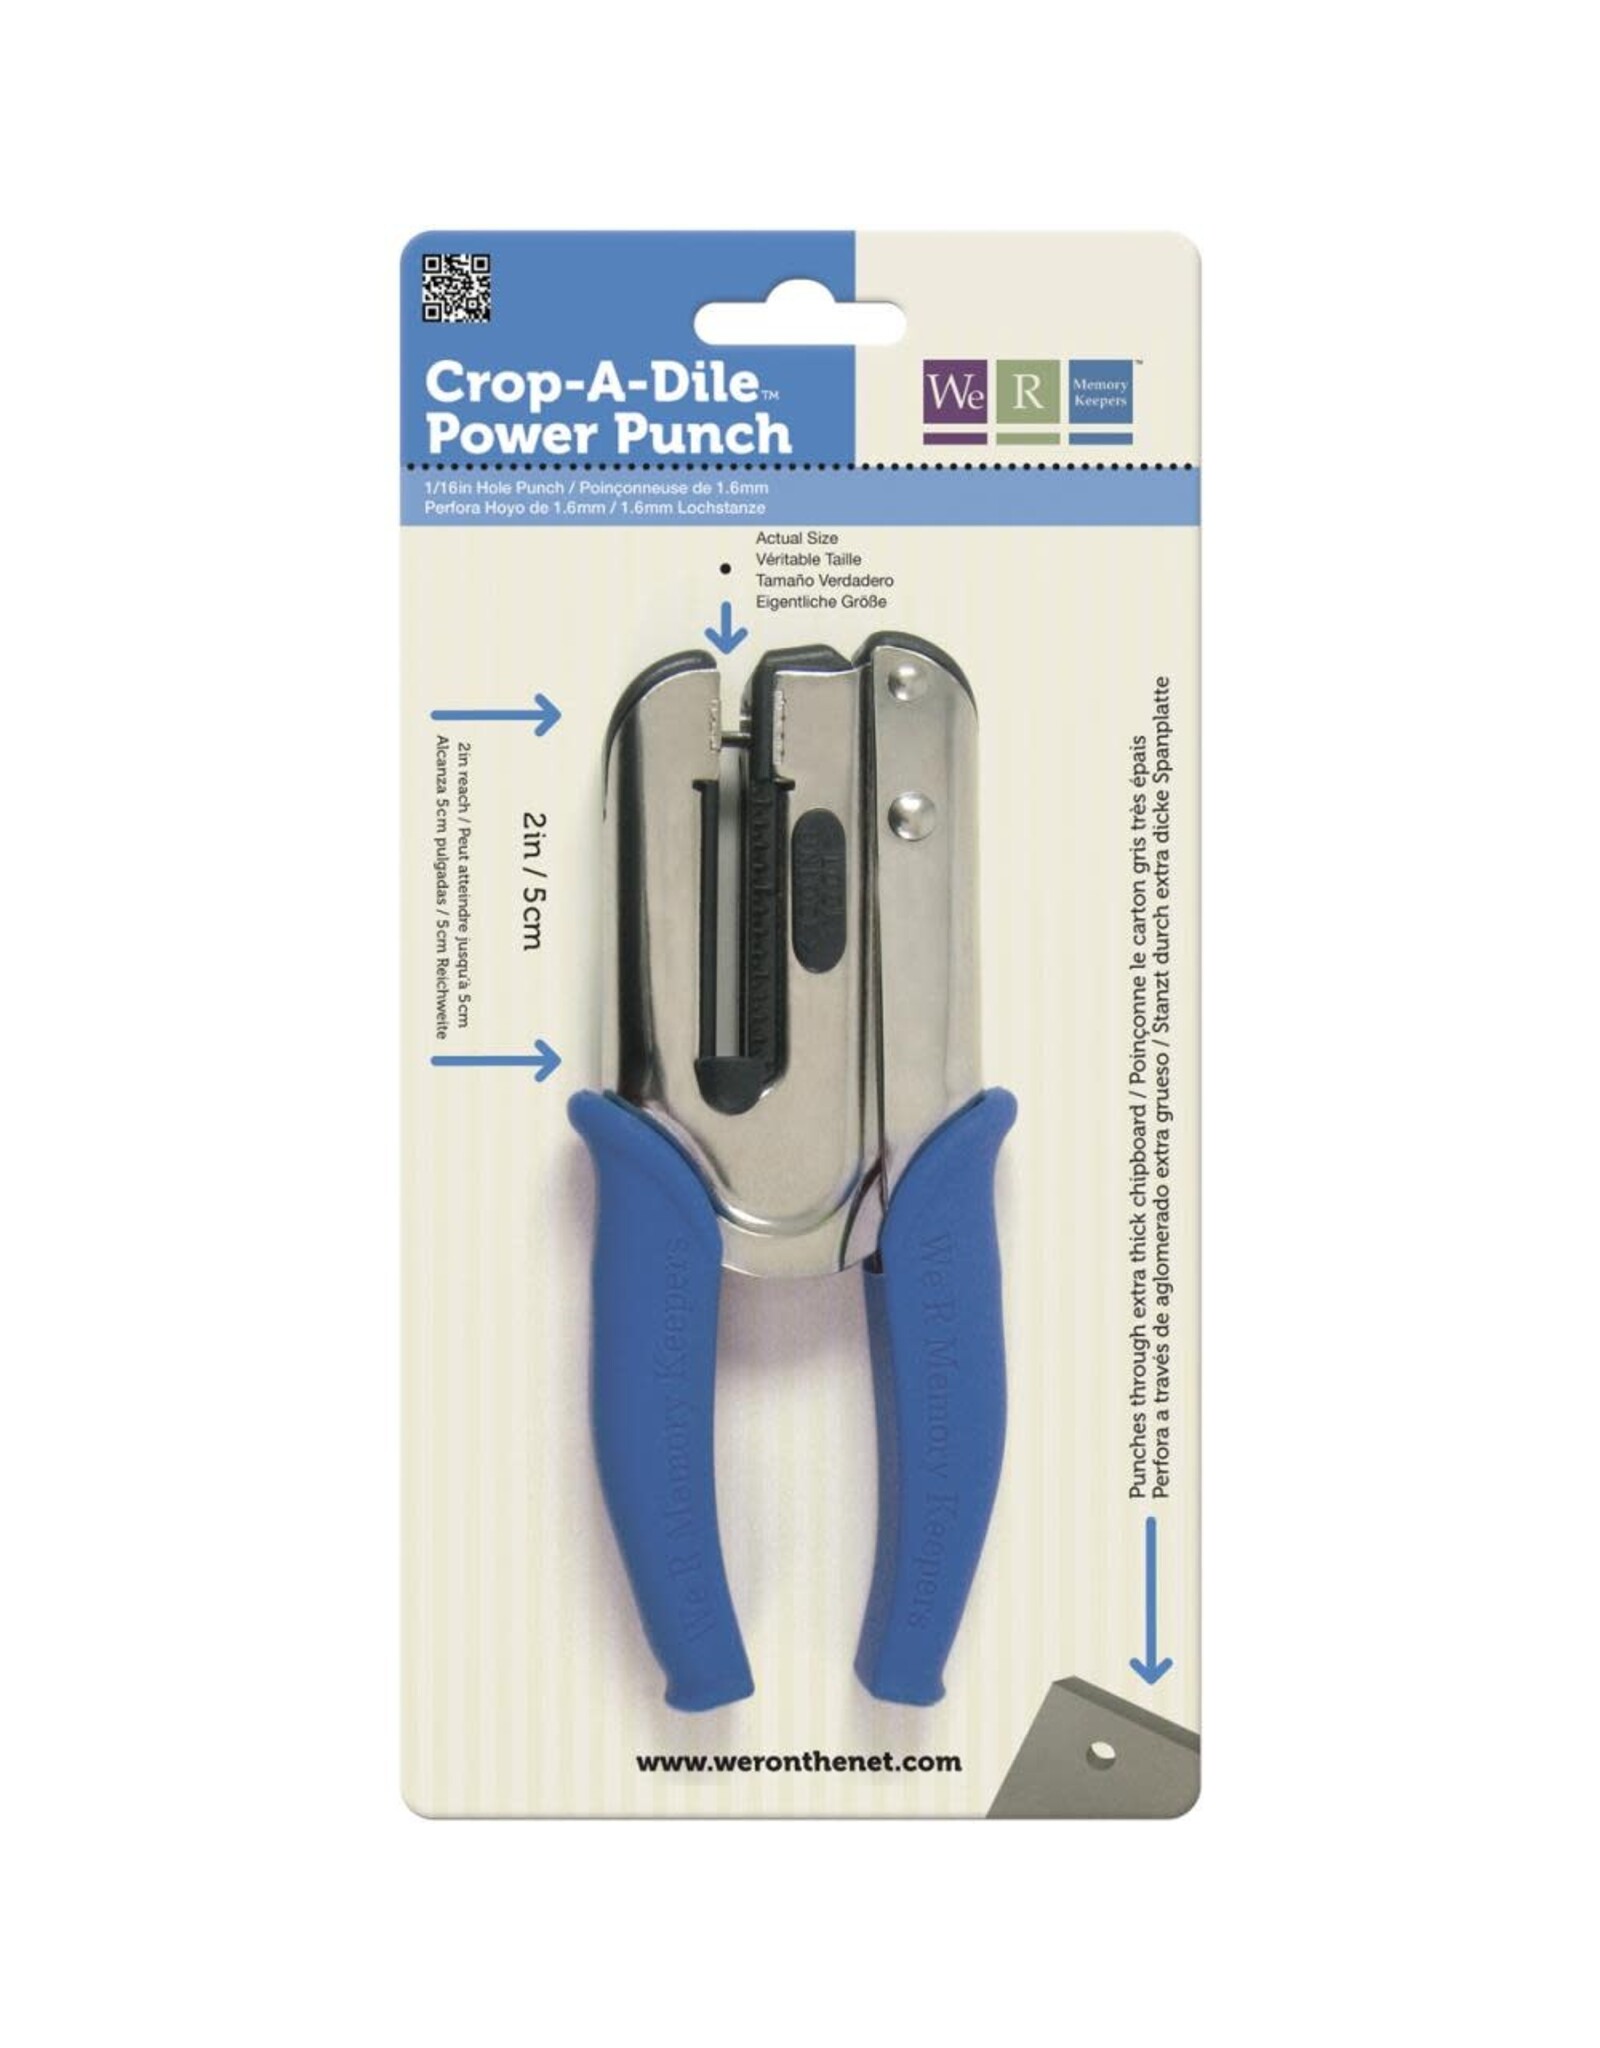 WE R MEMORY KEEPERS WE R MEMORY KEEPERS CROP-A-DILE POWER PUNCH 1/16 HOLE PUNCH